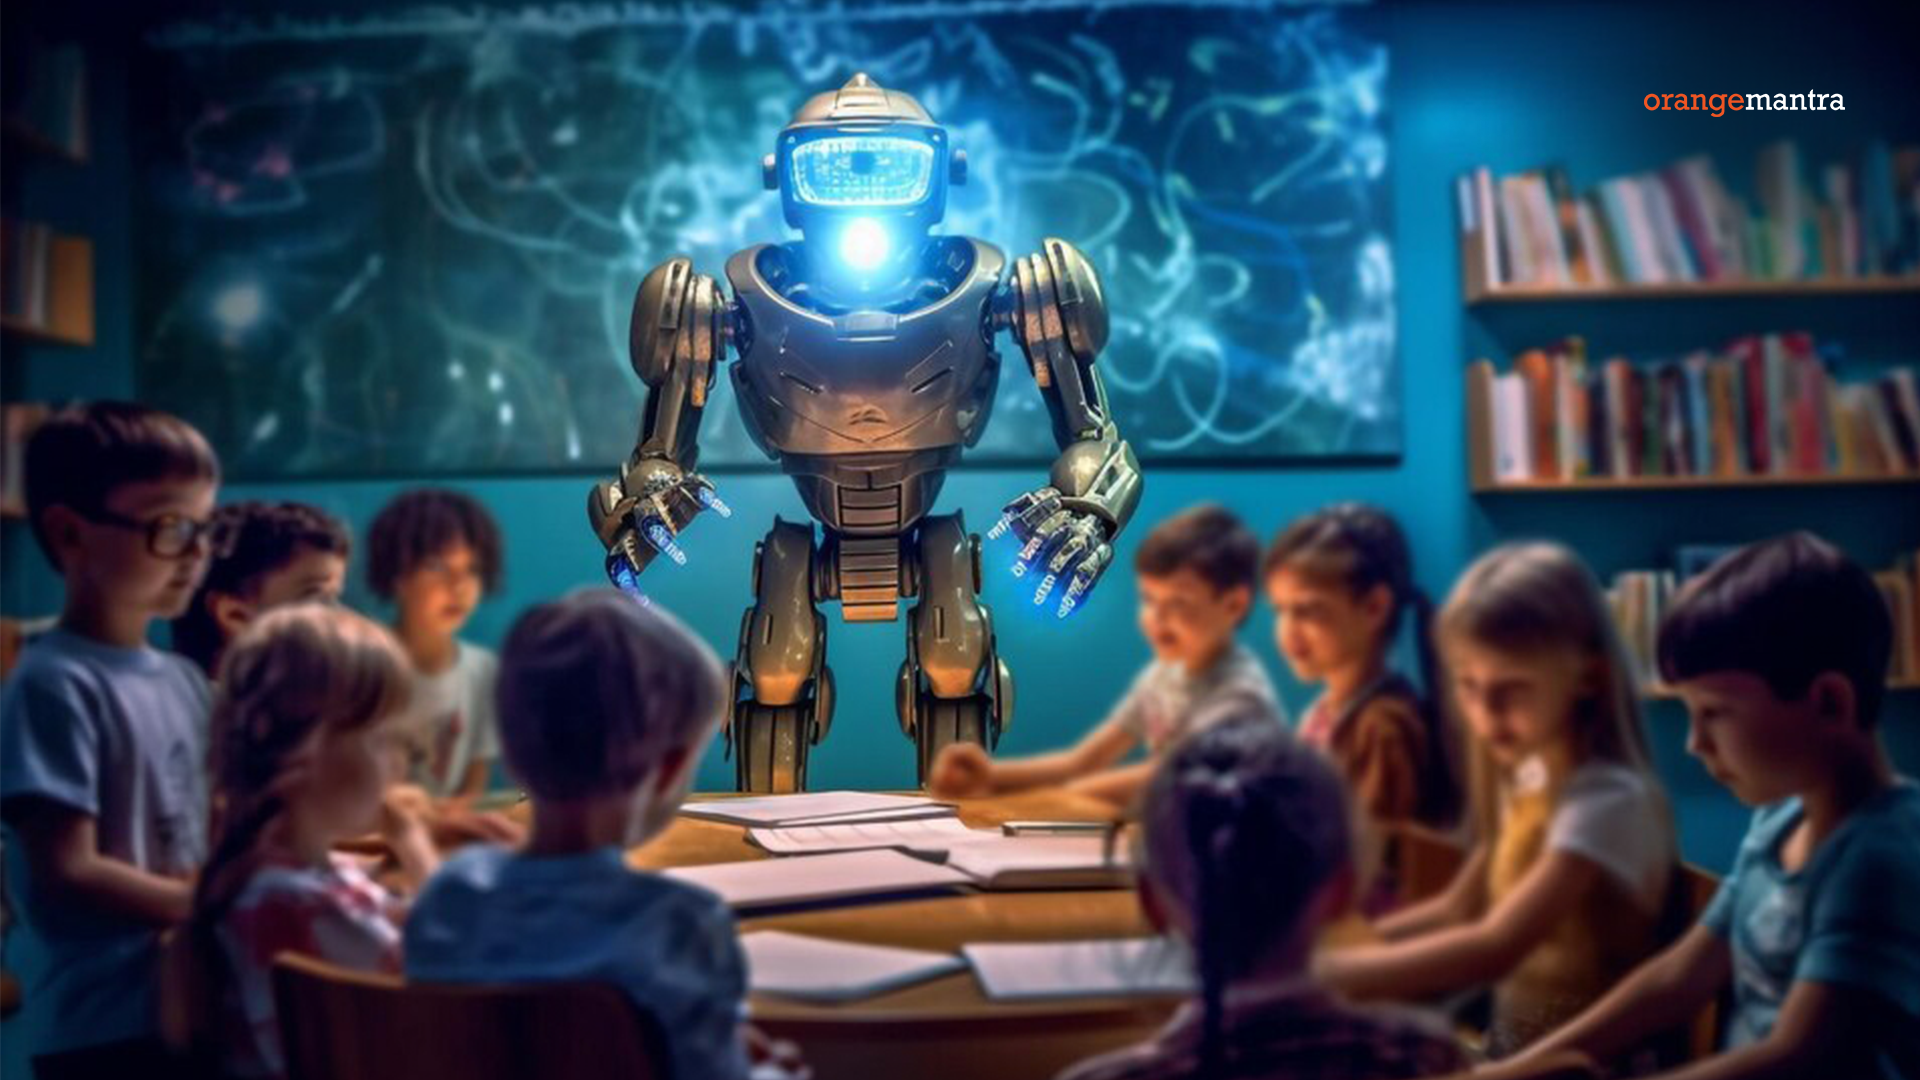 role of Artificial Intelligence in education